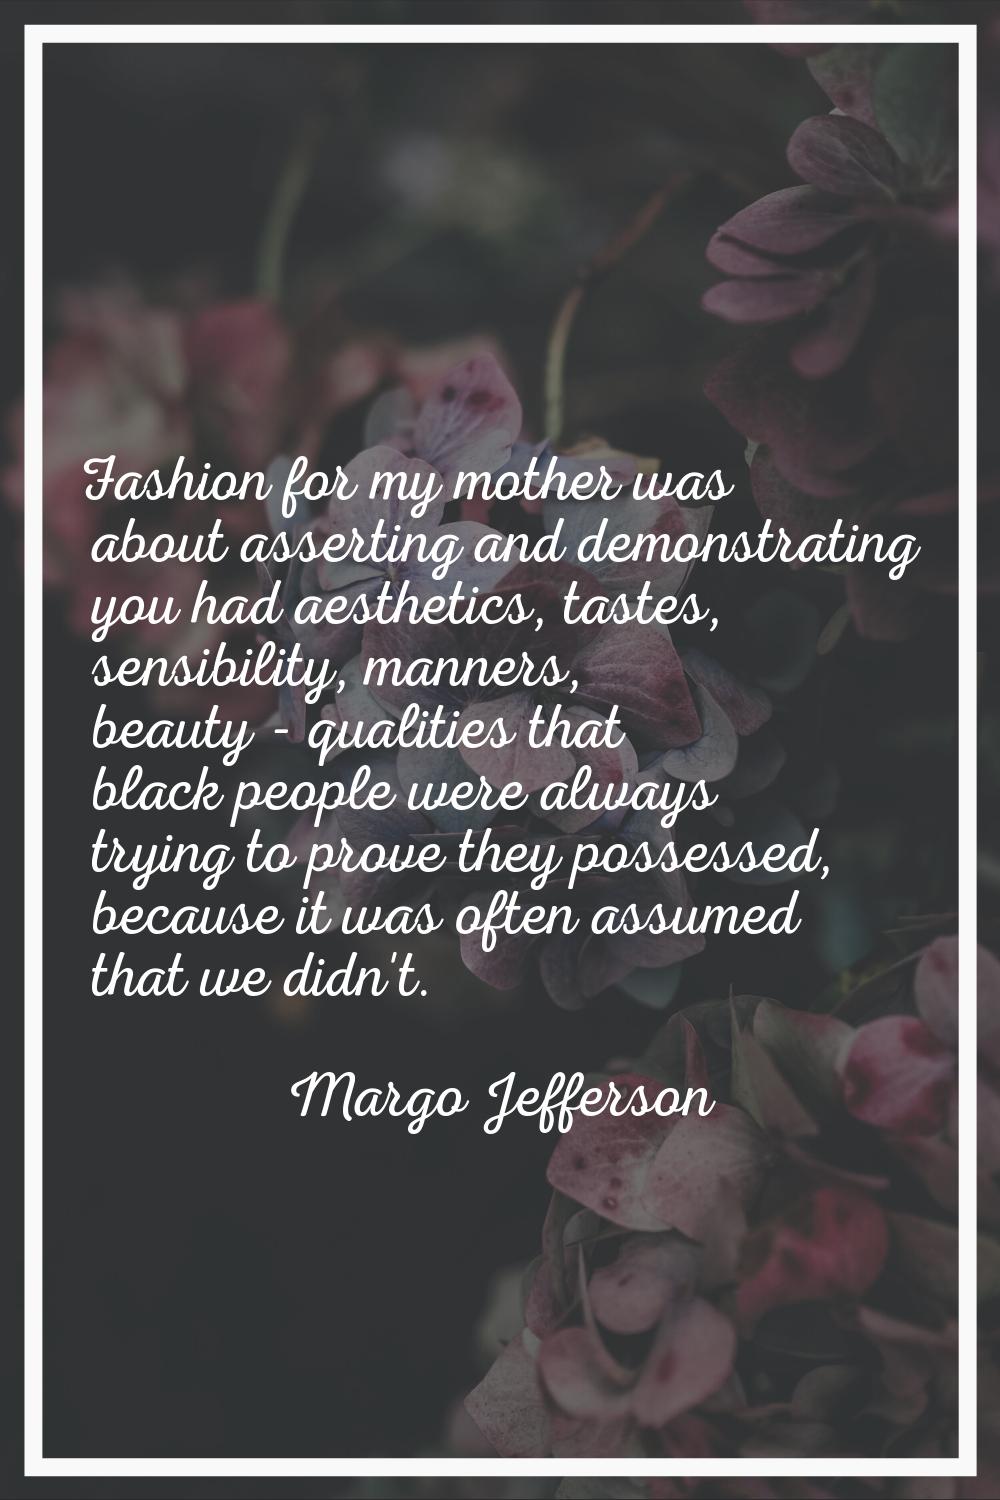 Fashion for my mother was about asserting and demonstrating you had aesthetics, tastes, sensibility